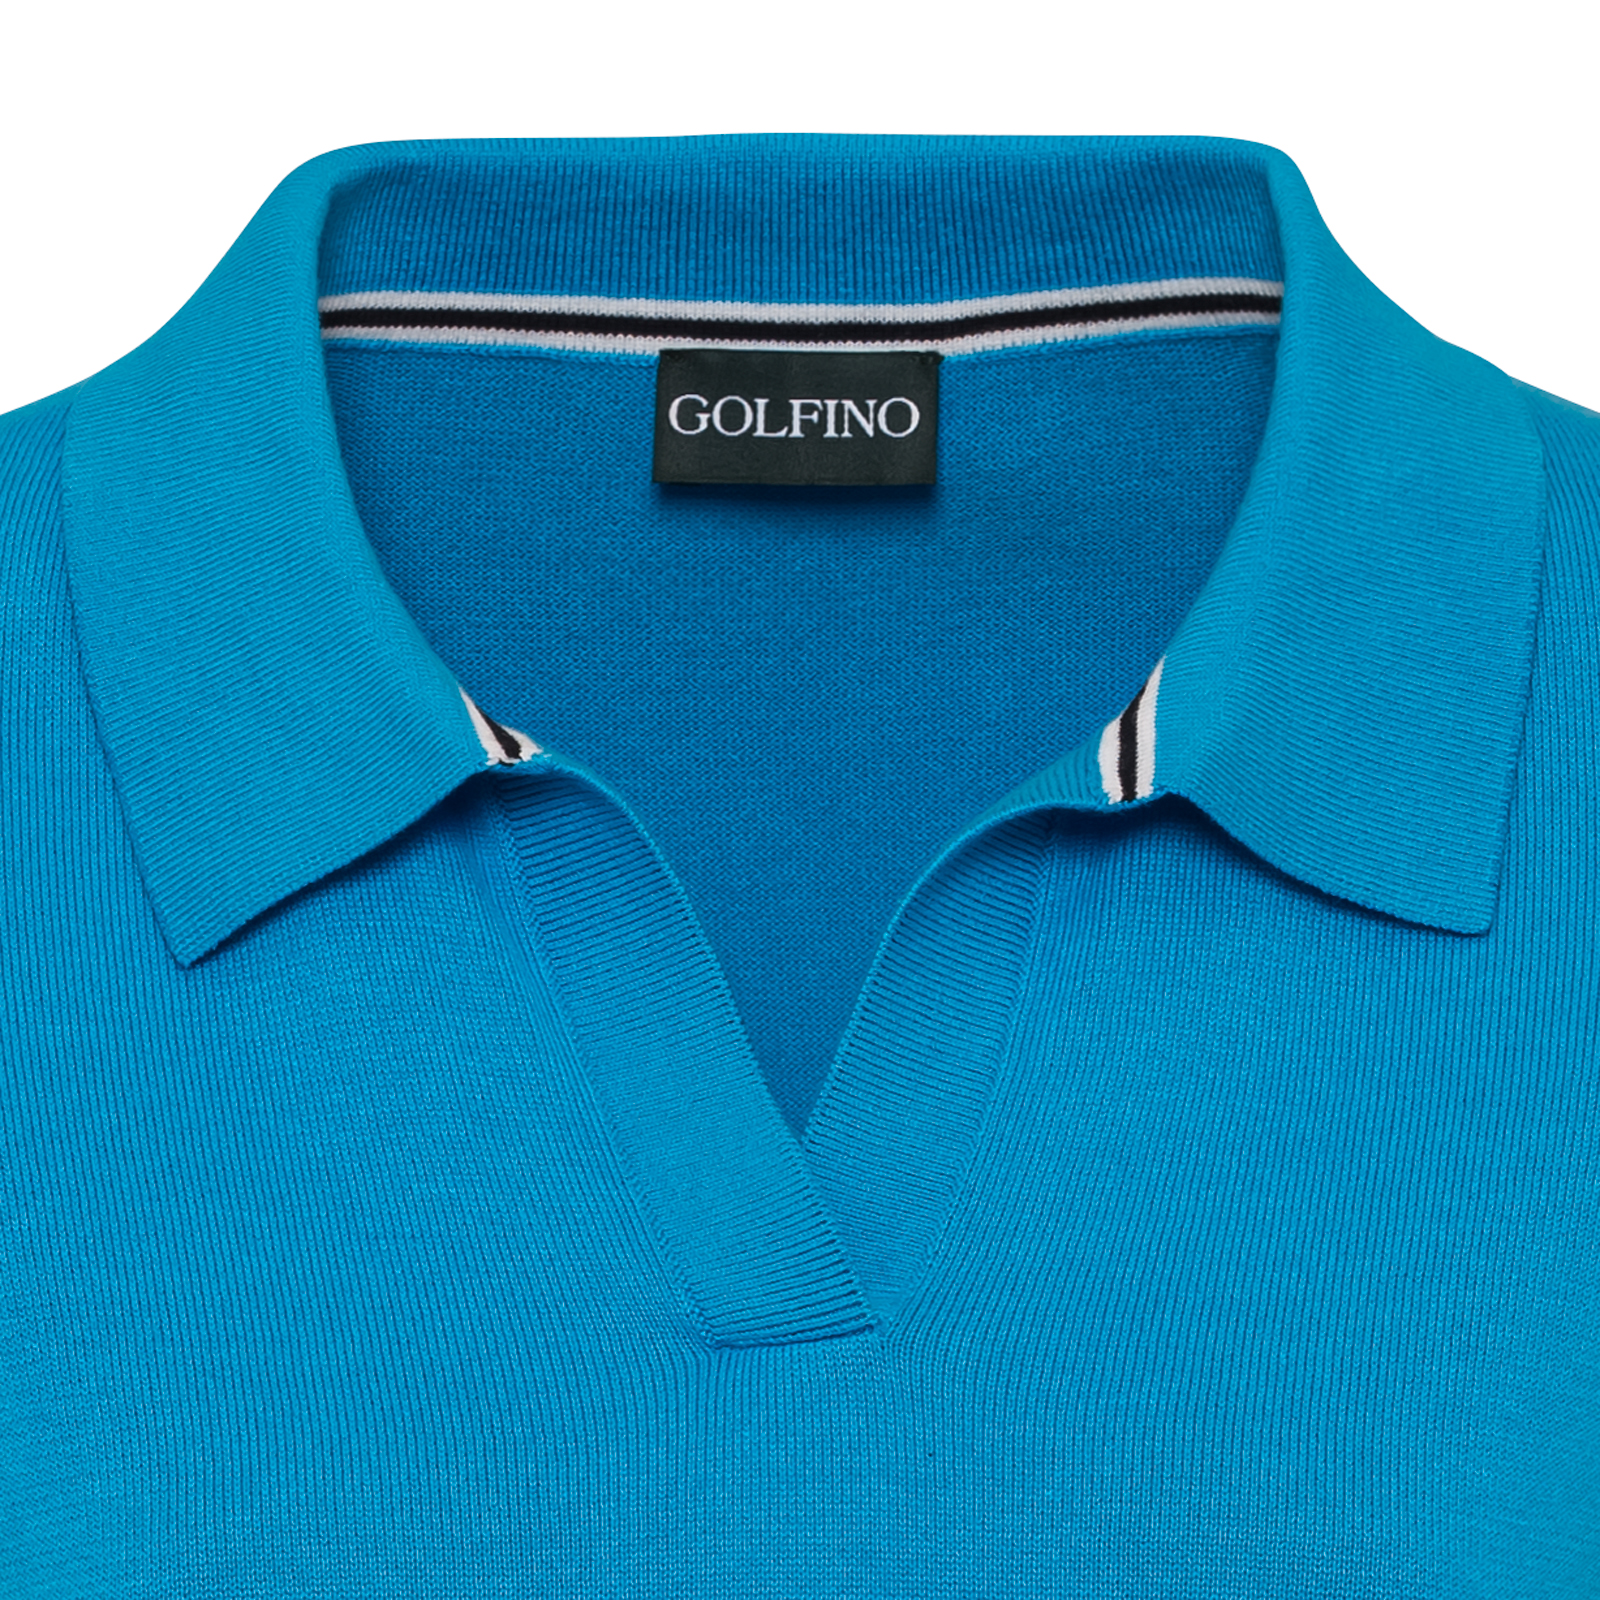 Ladies' golf polo shirt made from particularly soft Pima cotton